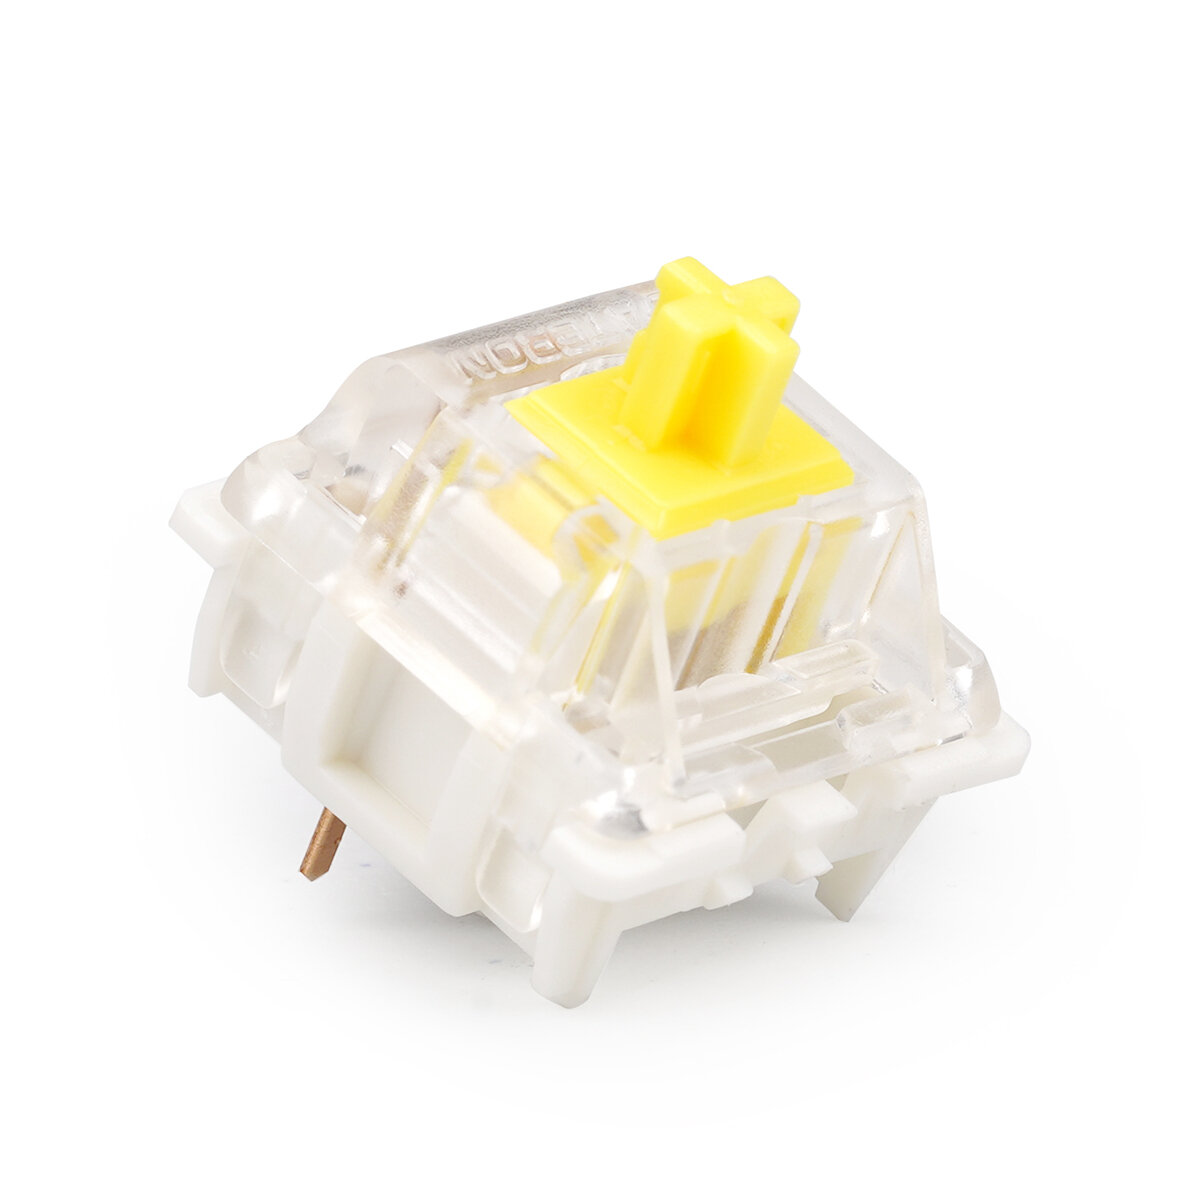 

110Pcs/pack Gateron Switch Linear Mechanical Yellow / Red Switch Prelubricate Keyboard Switch for DIY Mechanical Gaming